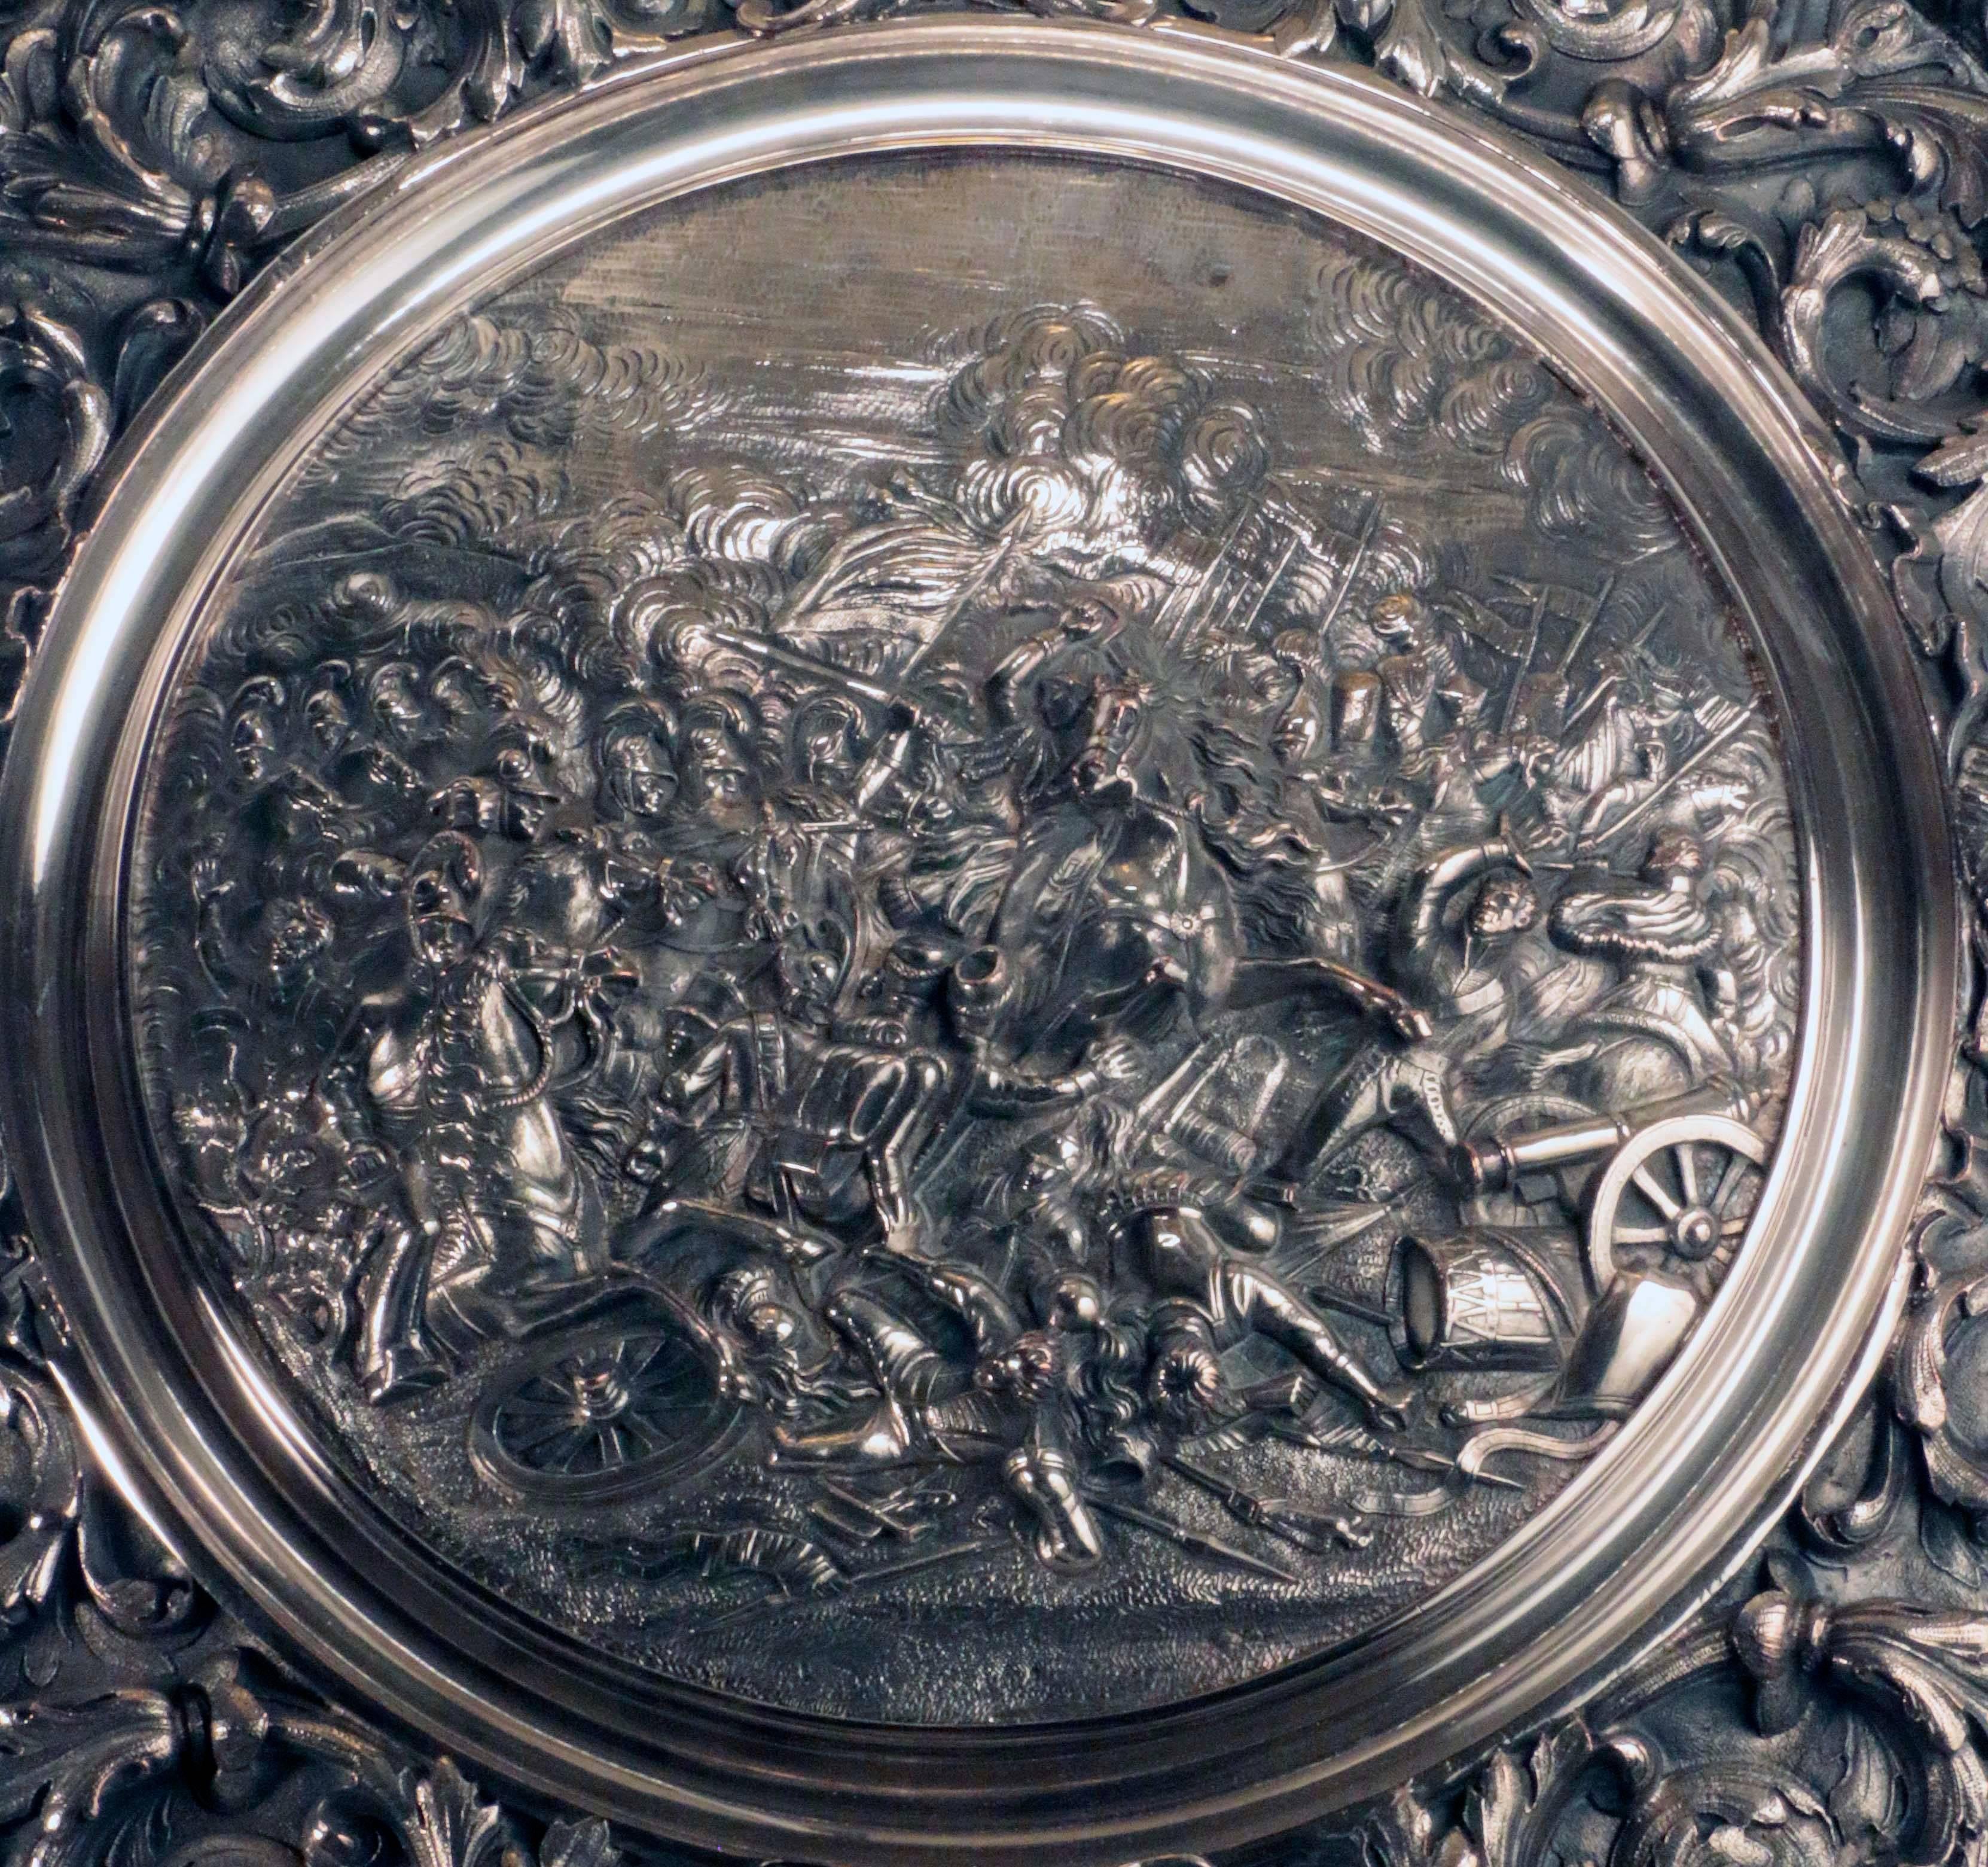 A sumptuous sideboard dish cast with, the decisive charge of the lifeguards at the battle of Waterloo. After Luke Clennell, 1769-1842. The central panel of
this plated dish celebrates the dramatic moment when the British heavy cavalry clash with